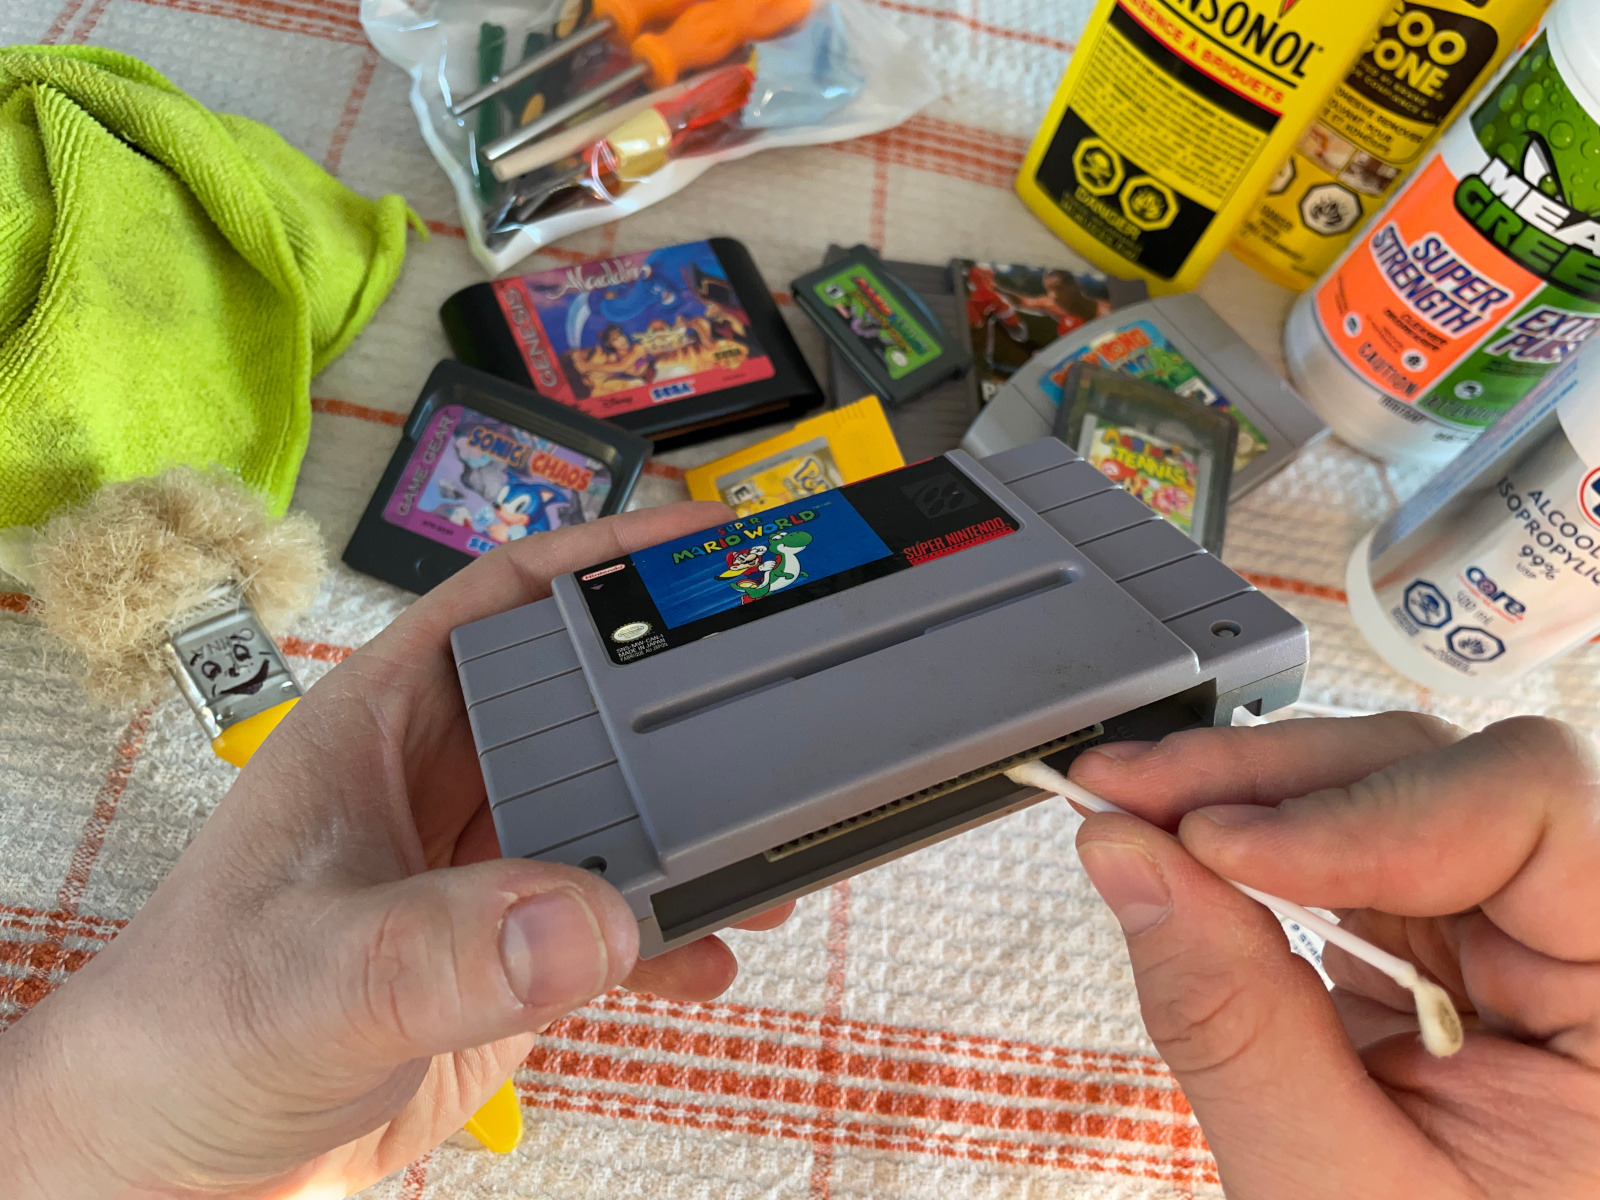 How to clean and preserve our Nintendo or SEGA cartridges